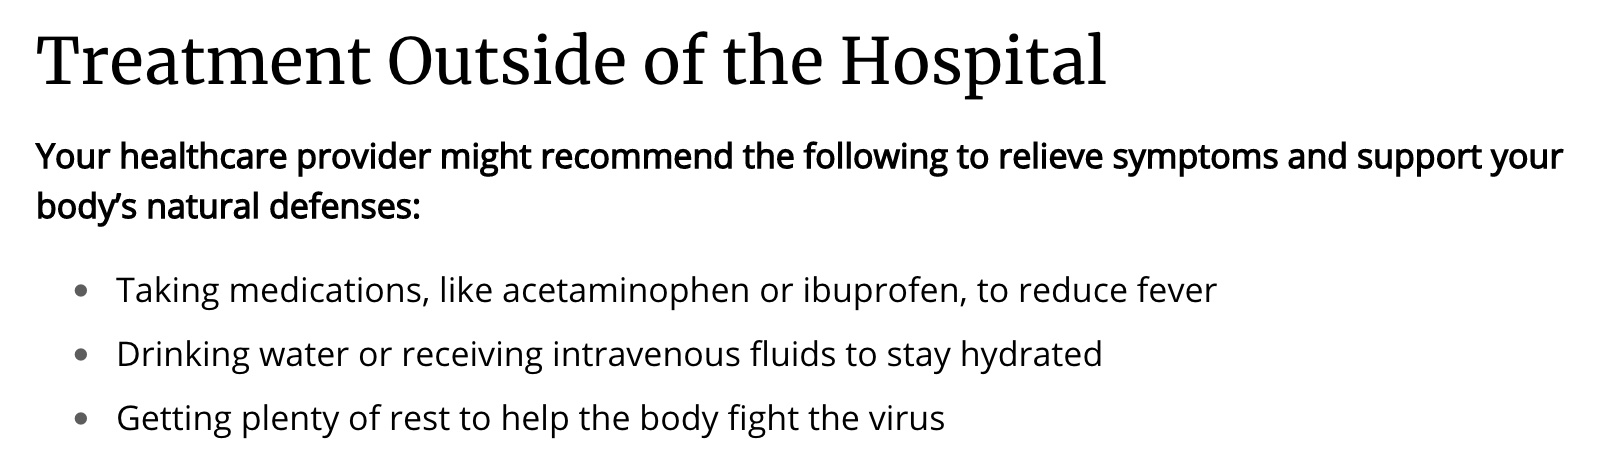 Image showing recommendations from the CDC for COVID-19 treatment outside of the hospital.